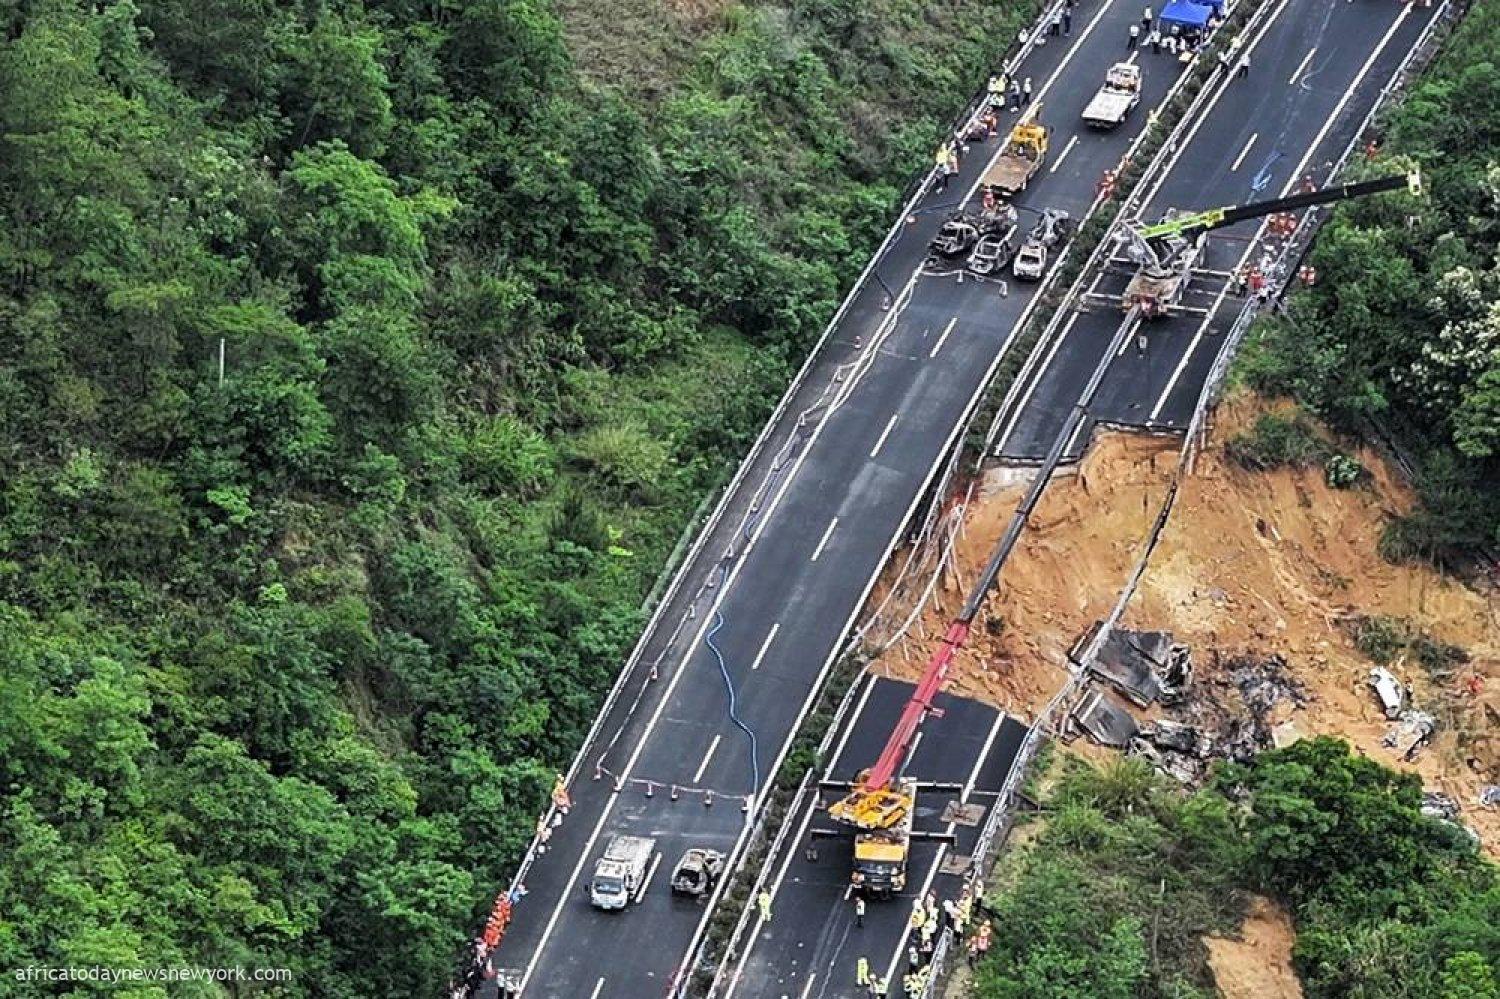 South China Road Disaster Claims 36 Lives As Casualty Rises